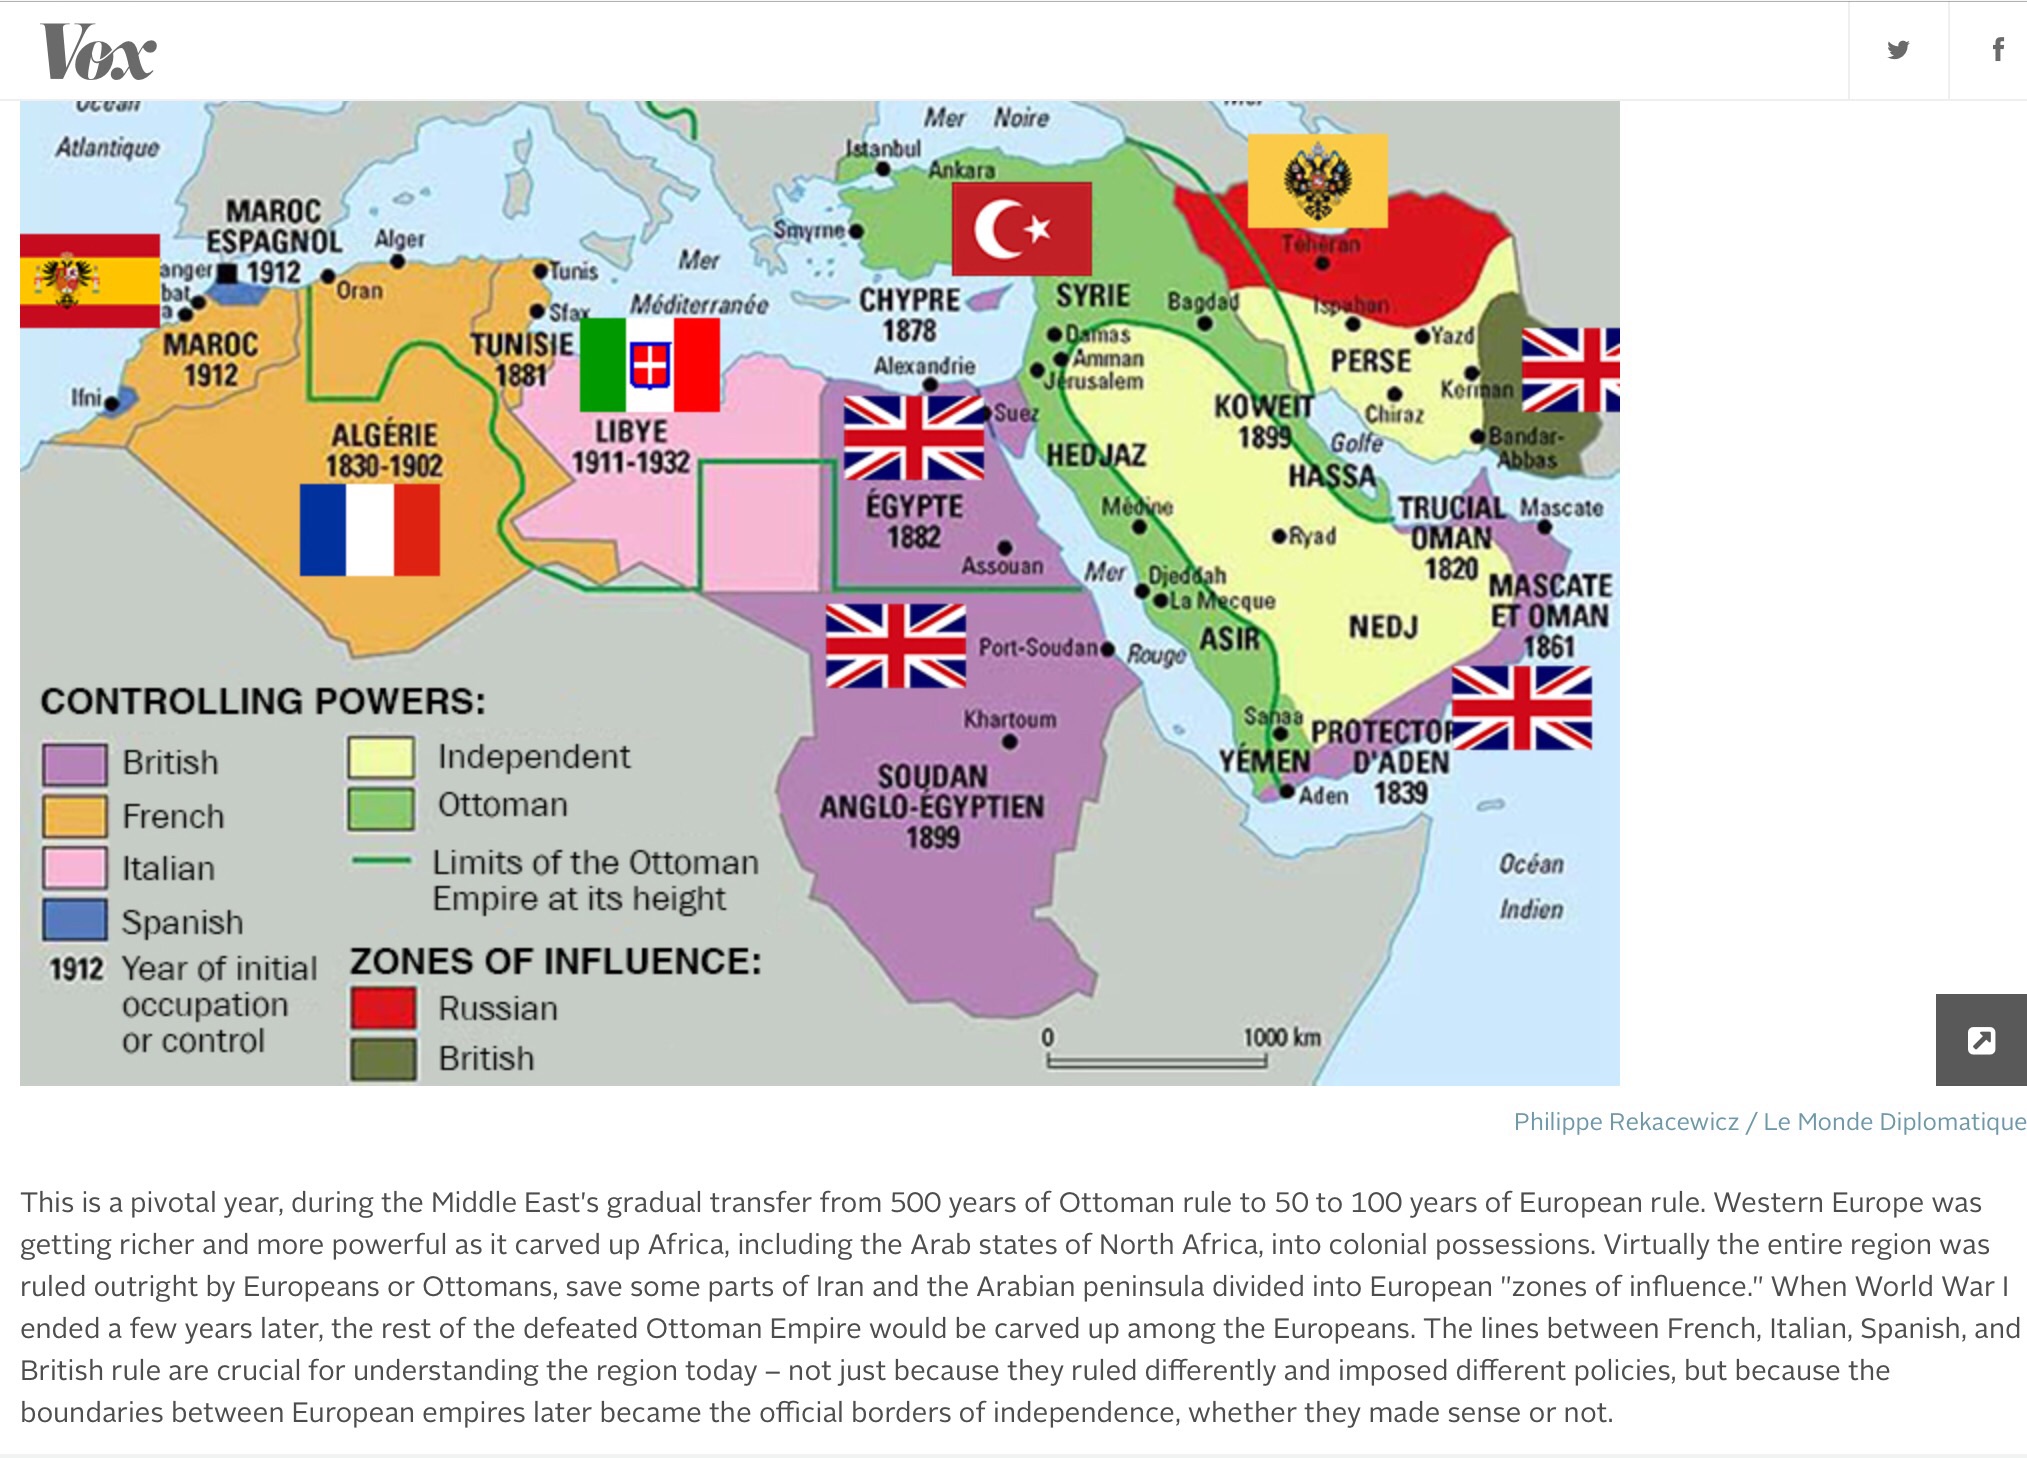 The Middle East in 1914. Source: Vox. http://bit.ly/1mf5ymr